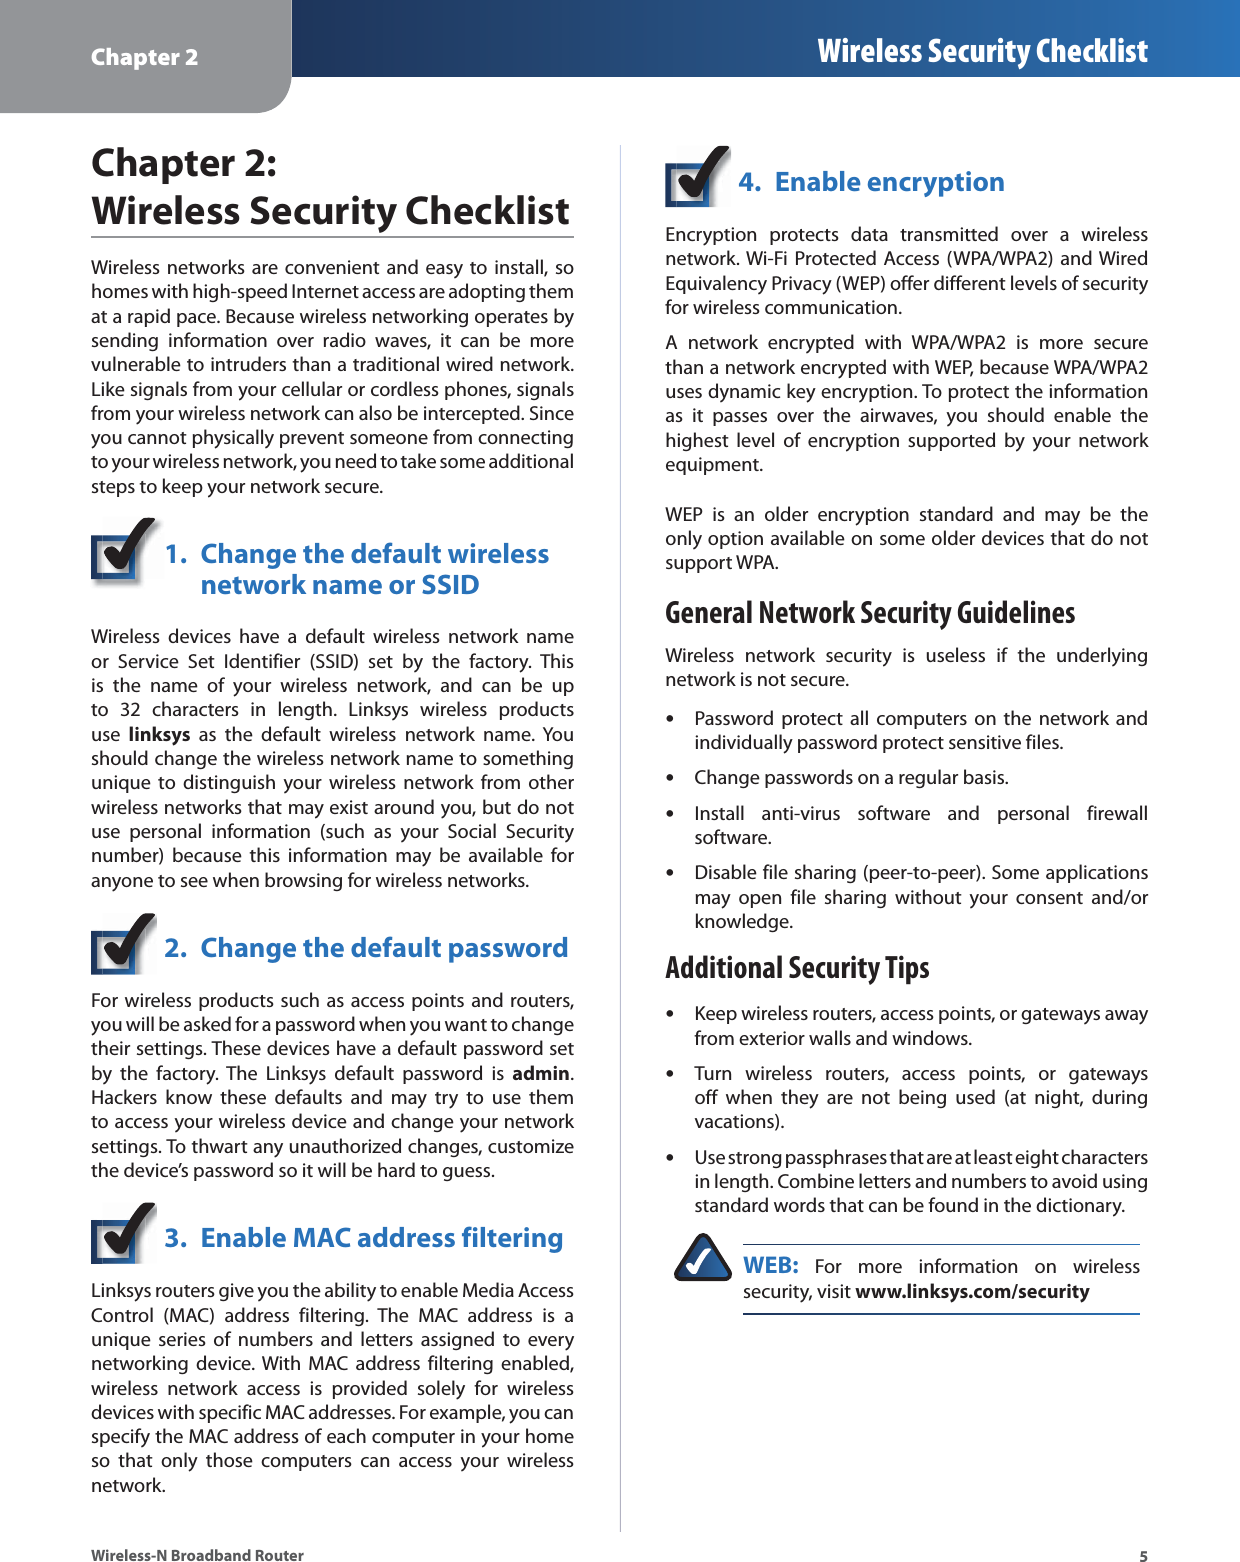 Chapter 2 Wireless Security Checklist5Wireless-N Broadband RouterChapter 2:  Wireless Security ChecklistWireless networks are convenient and easy to install, so homes with high-speed Internet access are adopting them at a rapid pace. Because wireless networking operates by sending information over radio waves, it can be more vulnerable to intruders than a traditional wired network. Like signals from your cellular or cordless phones, signals from your wireless network can also be intercepted. Since you cannot physically prevent someone from connecting to your wireless network, you need to take some additional steps to keep your network secure. 1.  Change the default wireless  network name or SSIDWireless devices have a default wireless network name or Service Set Identifier (SSID) set by the factory. This is the name of your wireless network, and can be up to 32 characters in length. Linksys wireless products use  linksys as the default wireless network name. You should change the wireless network name to something unique to distinguish your wireless network from other wireless networks that may exist around you, but do not use personal information (such as your Social Security number) because this information may be available for anyone to see when browsing for wireless networks. 2.  Change the default passwordFor wireless products such as access points and routers, you will be asked for a password when you want to change their settings. These devices have a default password set by the factory. The Linksys default password is admin. Hackers know these defaults and may try to use them to access your wireless device and change your network settings. To thwart any unauthorized changes, customize the device’s password so it will be hard to guess.3.  Enable MAC address filteringLinksys routers give you the ability to enable Media Access Control (MAC) address filtering. The MAC address is a unique series of numbers and letters assigned to every networking device. With MAC address filtering enabled, wireless network access is provided solely for wireless devices with specific MAC addresses. For example, you can specify the MAC address of each computer in your home so that only those computers can access your wireless network. 4.  Enable encryptionEncryption protects data transmitted over a wireless network. Wi-Fi Protected Access (WPA/WPA2) and Wired Equivalency Privacy (WEP) offer different levels of security for wireless communication.A network encrypted with WPA/WPA2 is more secure than a network encrypted with WEP, because WPA/WPA2 uses dynamic key encryption. To protect the information as it passes over the airwaves, you should enable the highest level of encryption supported by your network equipment. WEP is an older encryption standard and may be the only option available on some older devices that do not support WPA.General Network Security GuidelinesWireless network security is useless if the underlying network is not secure. Password protect all computers on the network and individually password protect sensitive files.Change passwords on a regular basis.Install anti-virus software and personal firewall software.Disable file sharing (peer-to-peer). Some applications may open file sharing without your consent and/or knowledge.Additional Security TipsKeep wireless routers, access points, or gateways away from exterior walls and windows.Turn wireless routers, access points, or gateways off when they are not being used (at night, during vacations).Use strong passphrases that are at least eight characters in length. Combine letters and numbers to avoid using standard words that can be found in the dictionary. WEB: For more information on wireless security, visit www.linksys.com/security•••••••